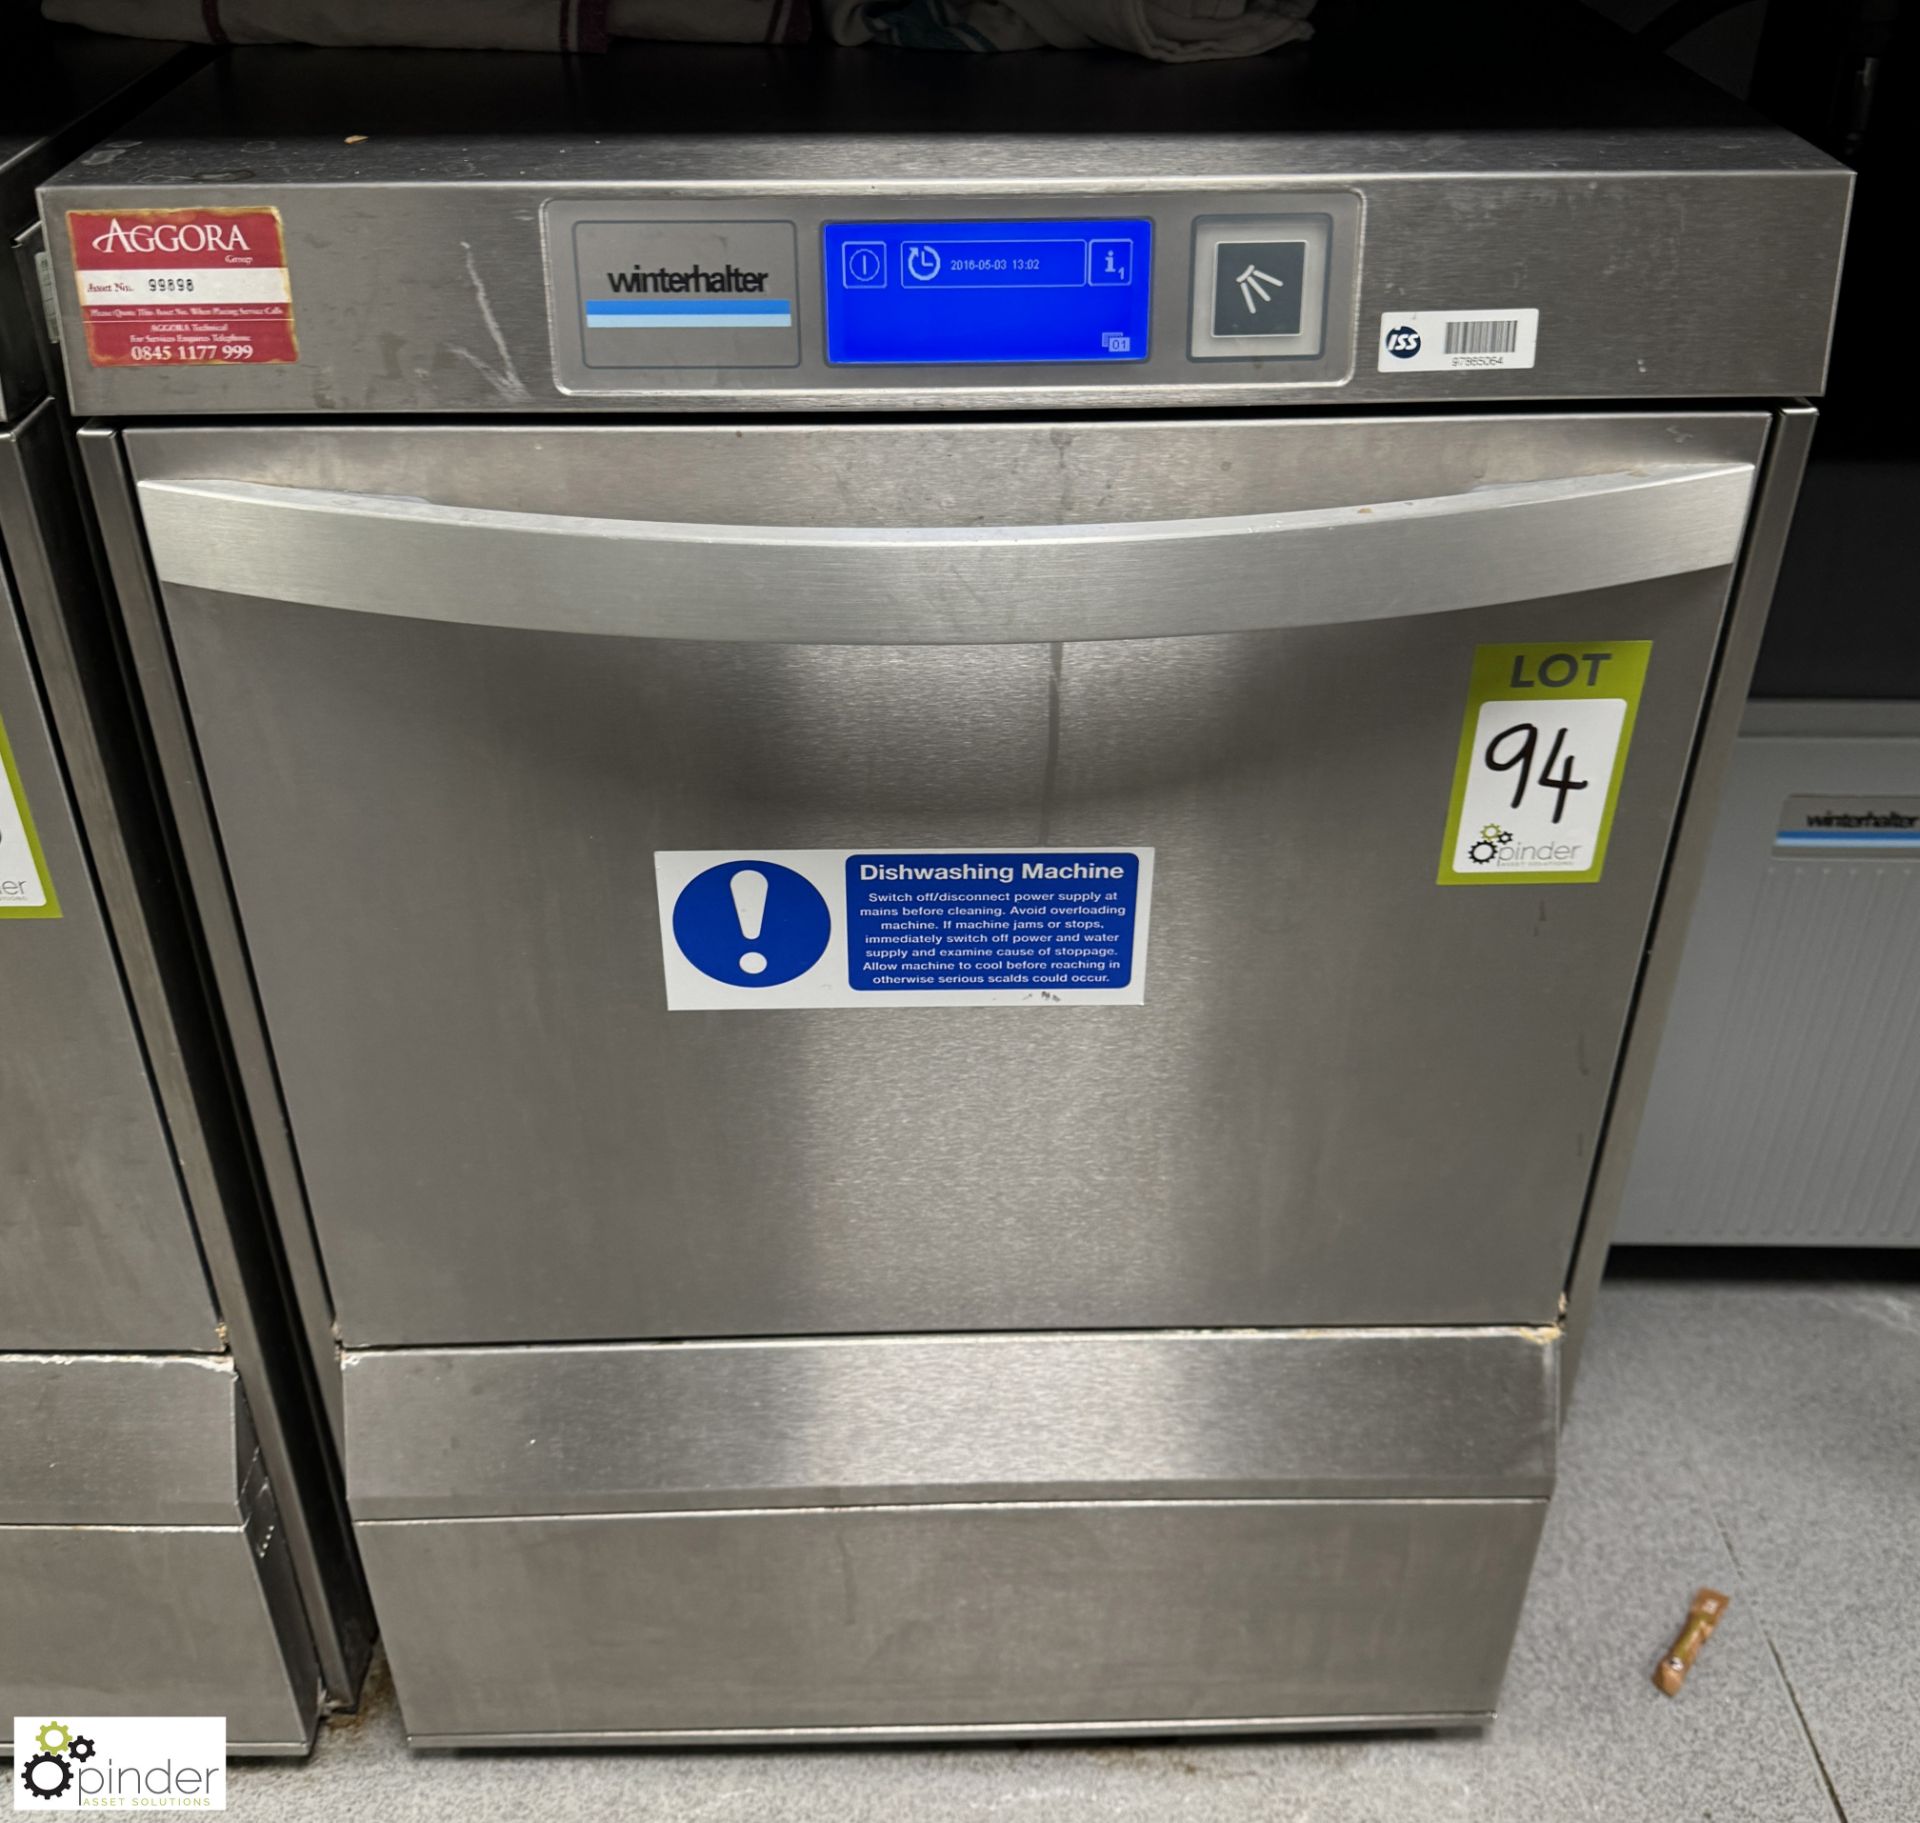 Winterhalter stainless steel under counter single tray Dishwasher (location in building – basement - Image 2 of 5